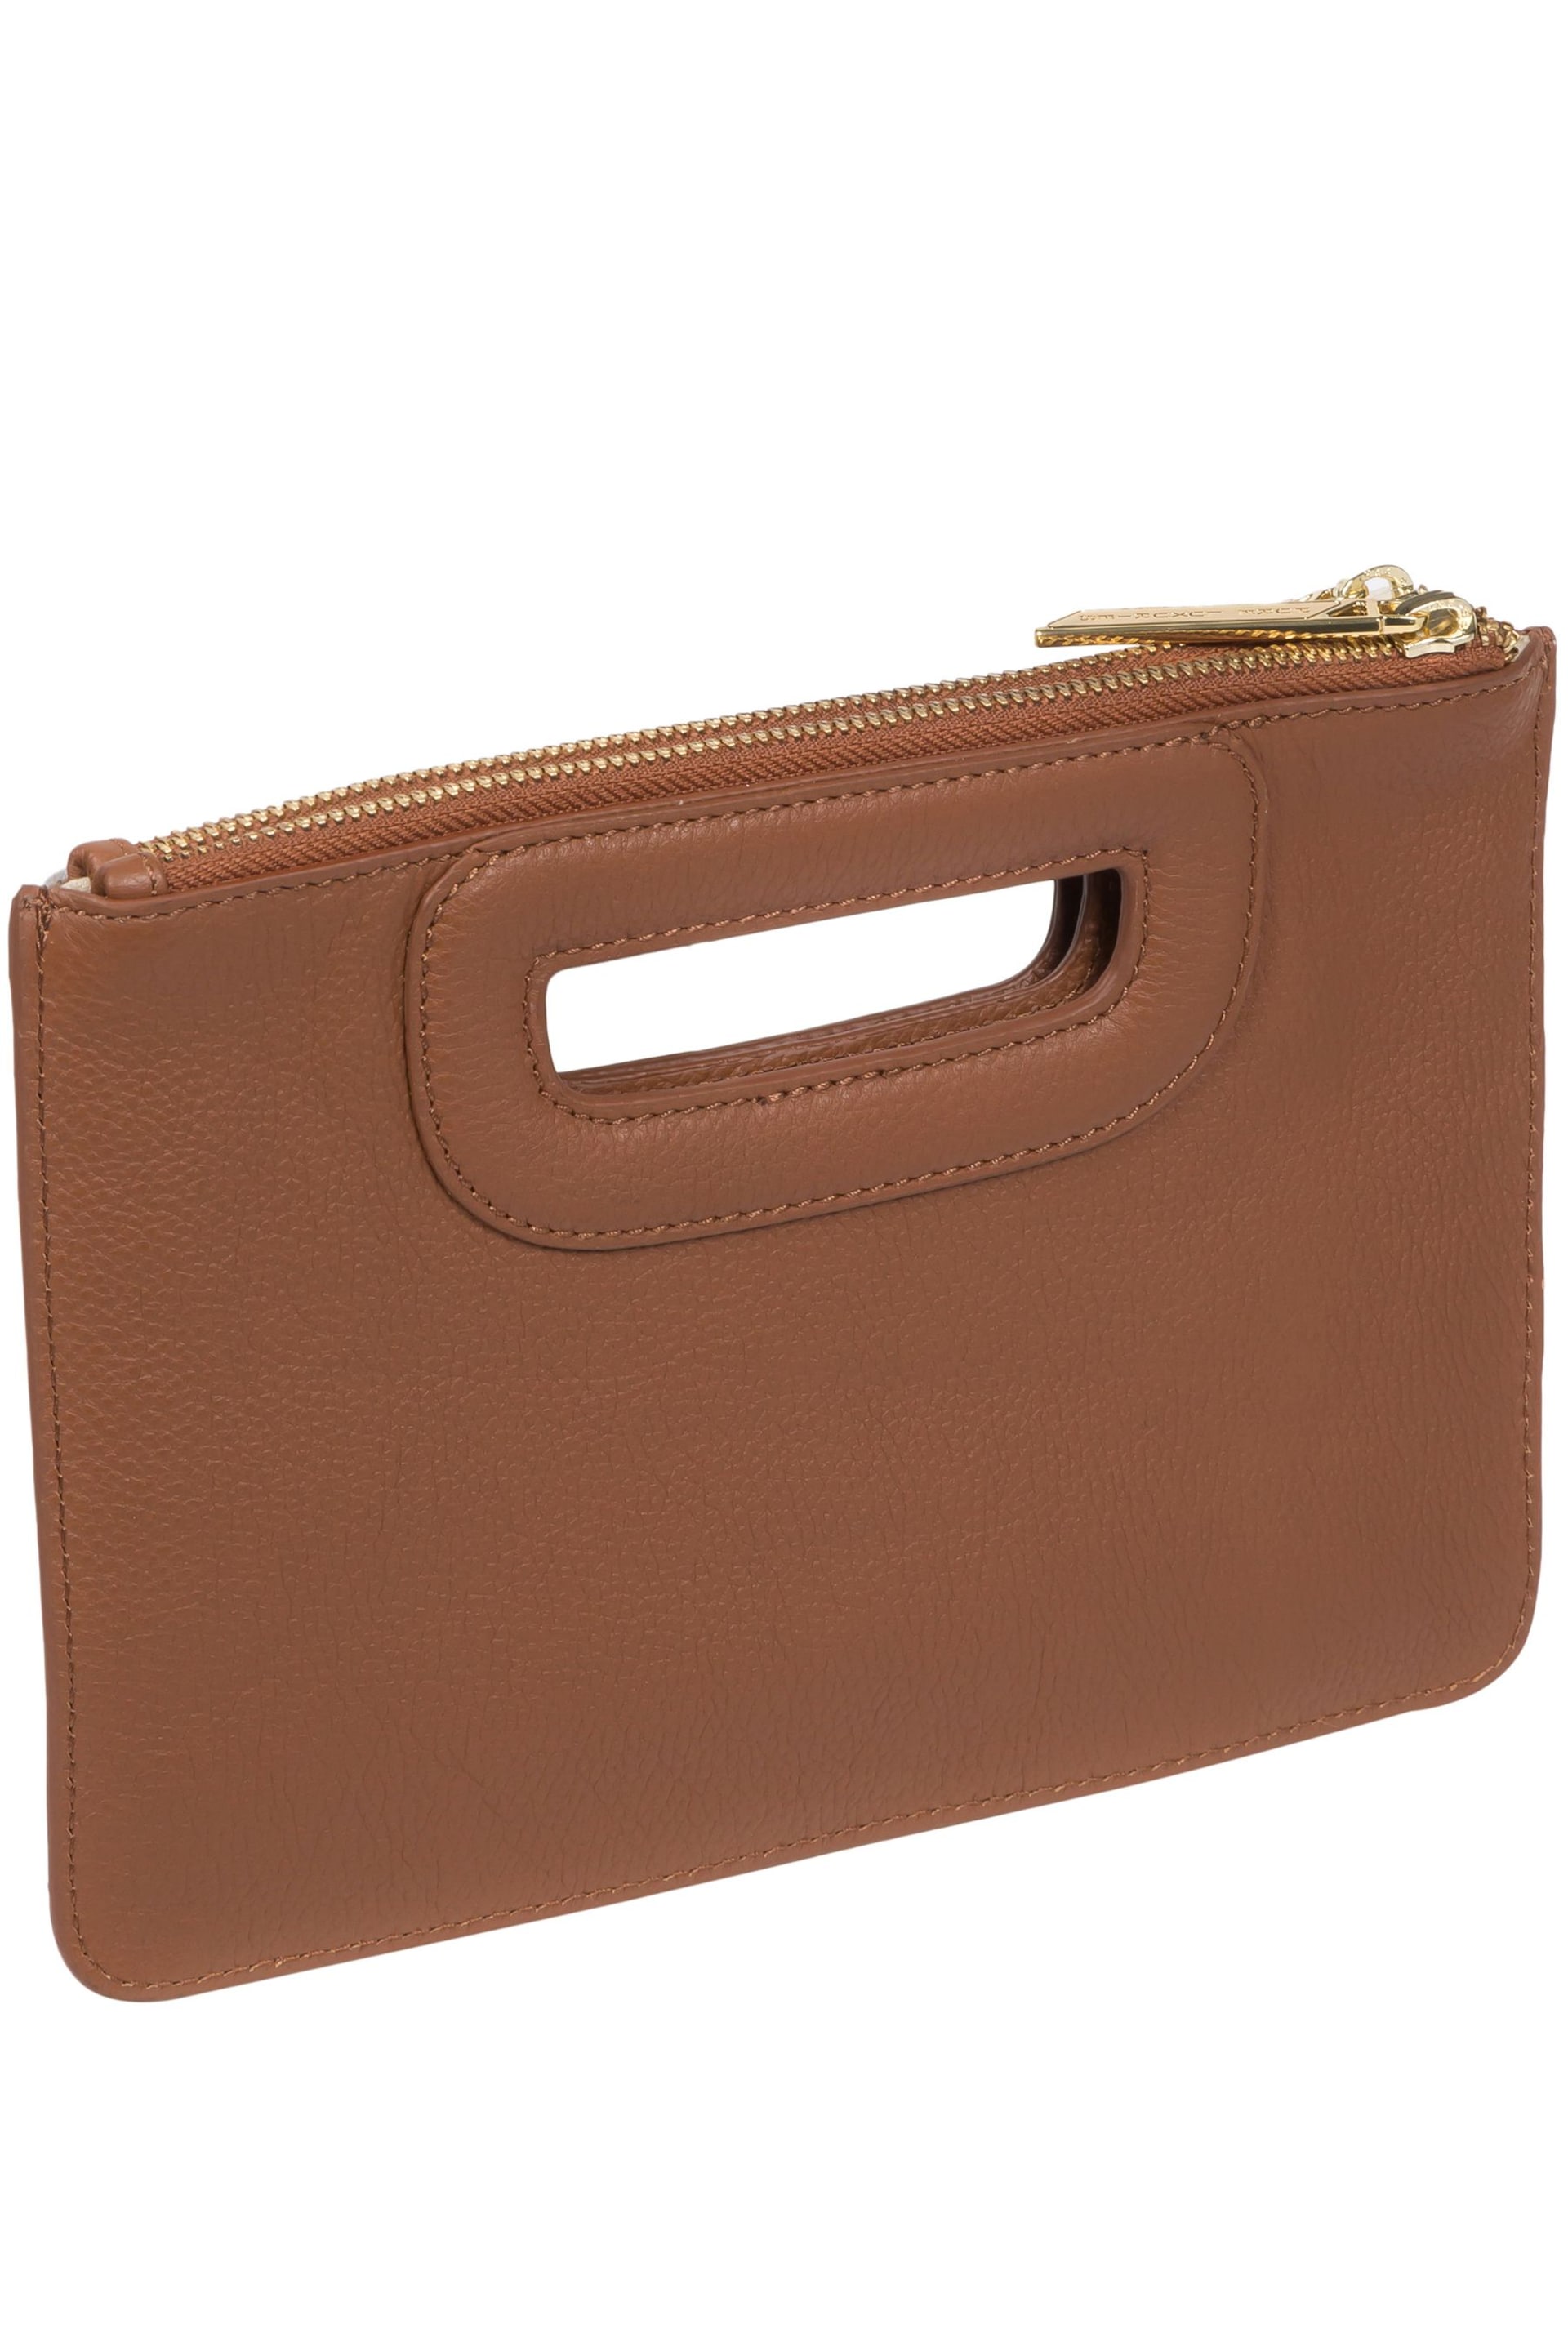 Pure Luxuries London Esher Leather Clutch Bag - Image 4 of 5